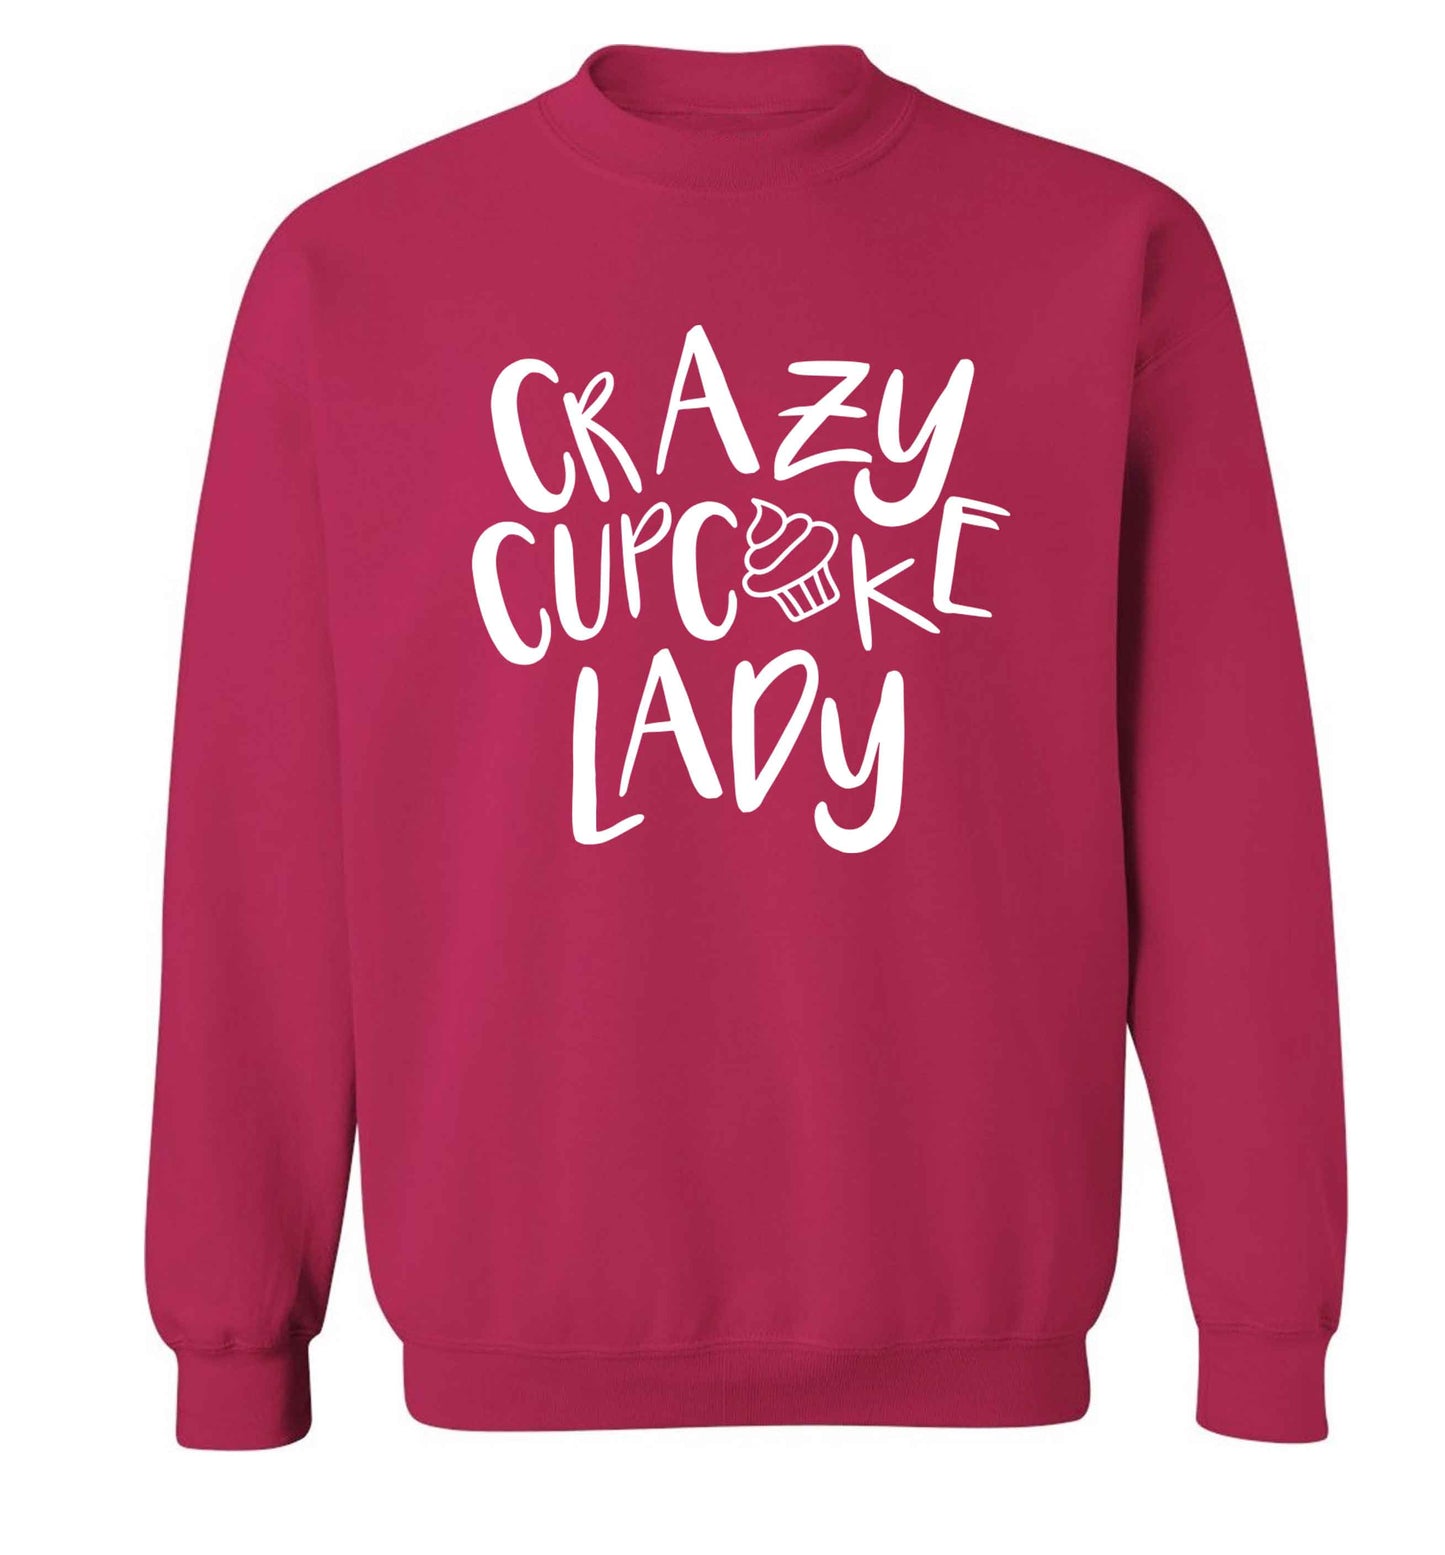 Crazy cupcake lady Adult's unisex pink Sweater 2XL